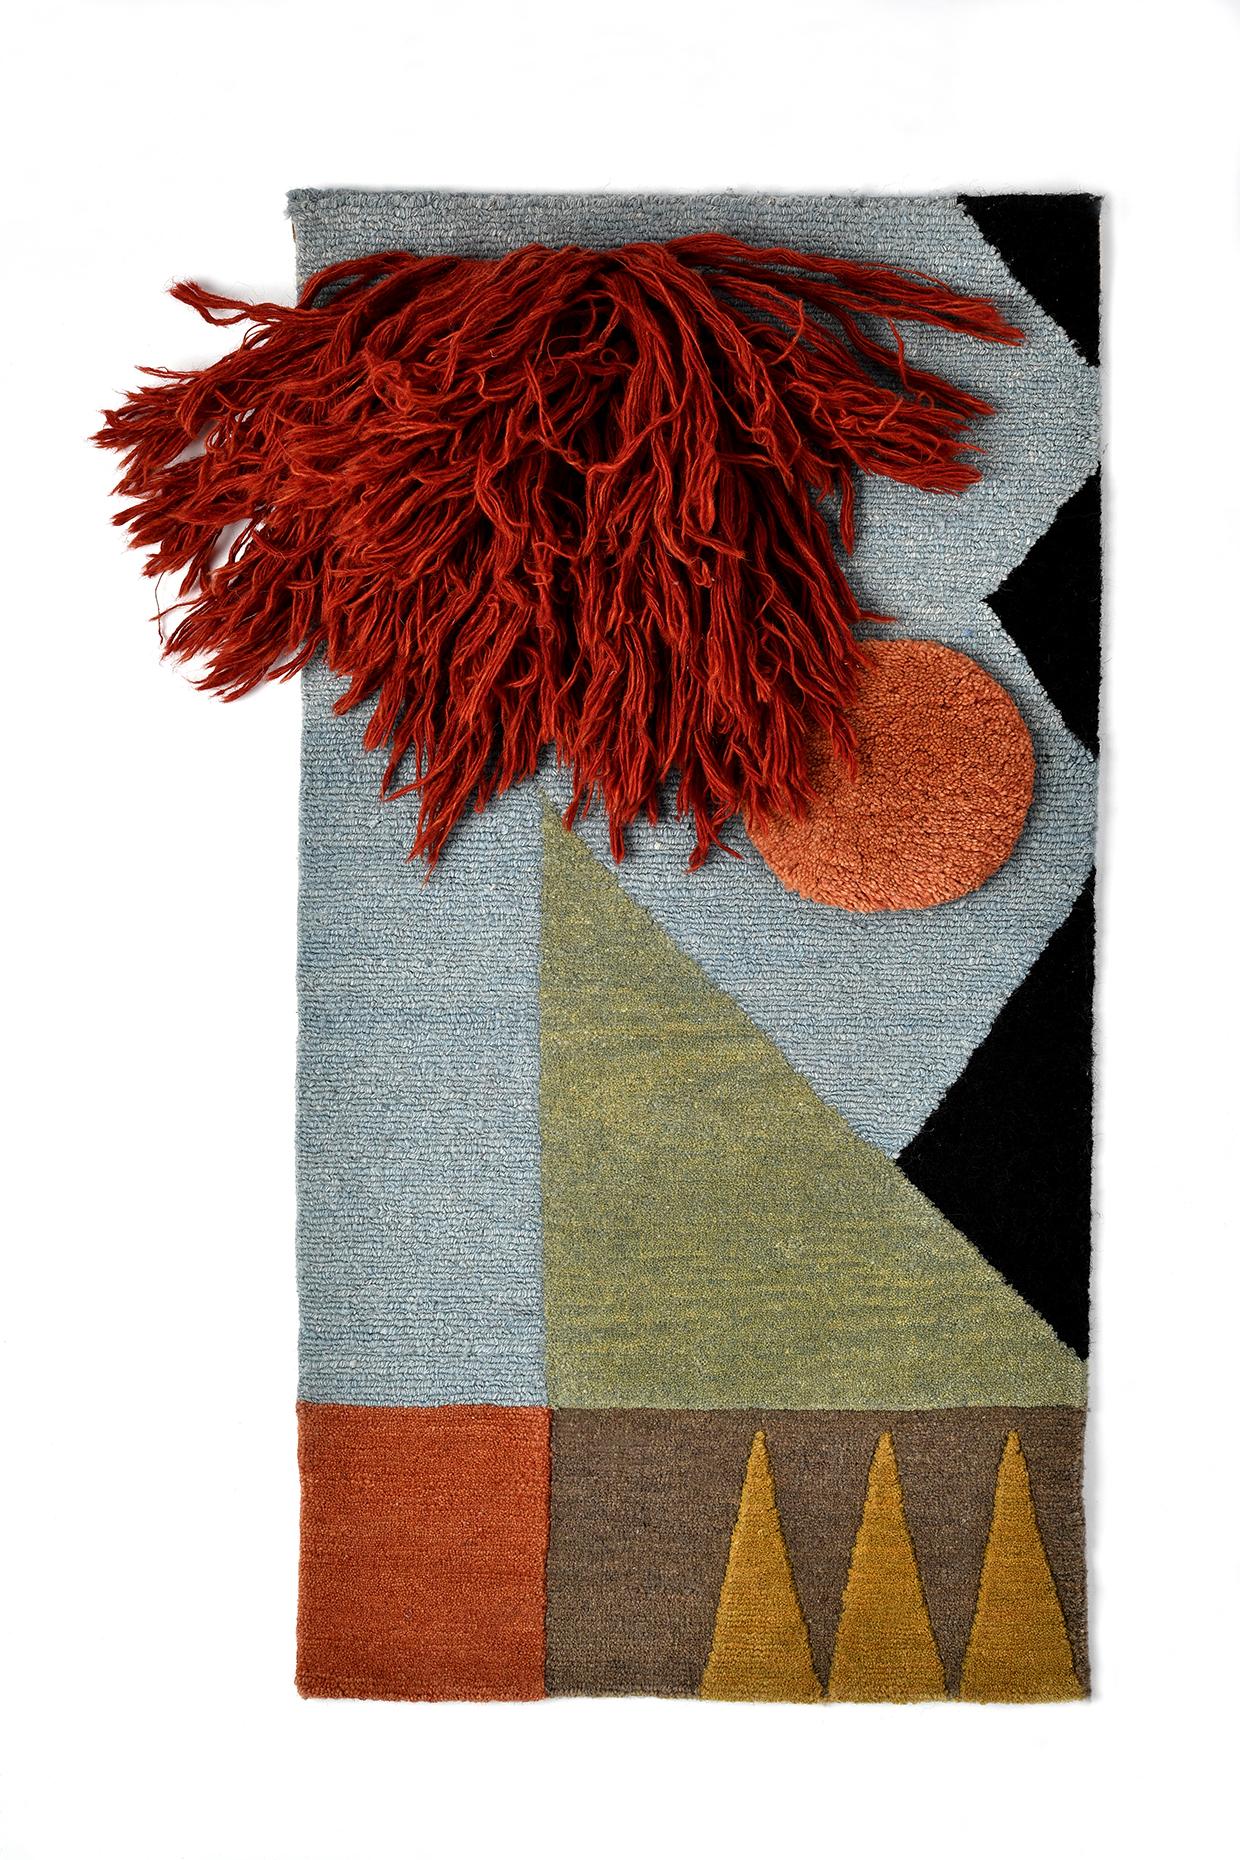 No. 221 Hand-knotted textile poster by Lyk Carpet
Homage to the Bauhauswomen
Dimensions: W 42 x L 82 cm.
Materials: 100% tibetan highland-wool, new pure hand-combed and hand-spun wool, natural vegetable-dyed wool, 100 knots per square